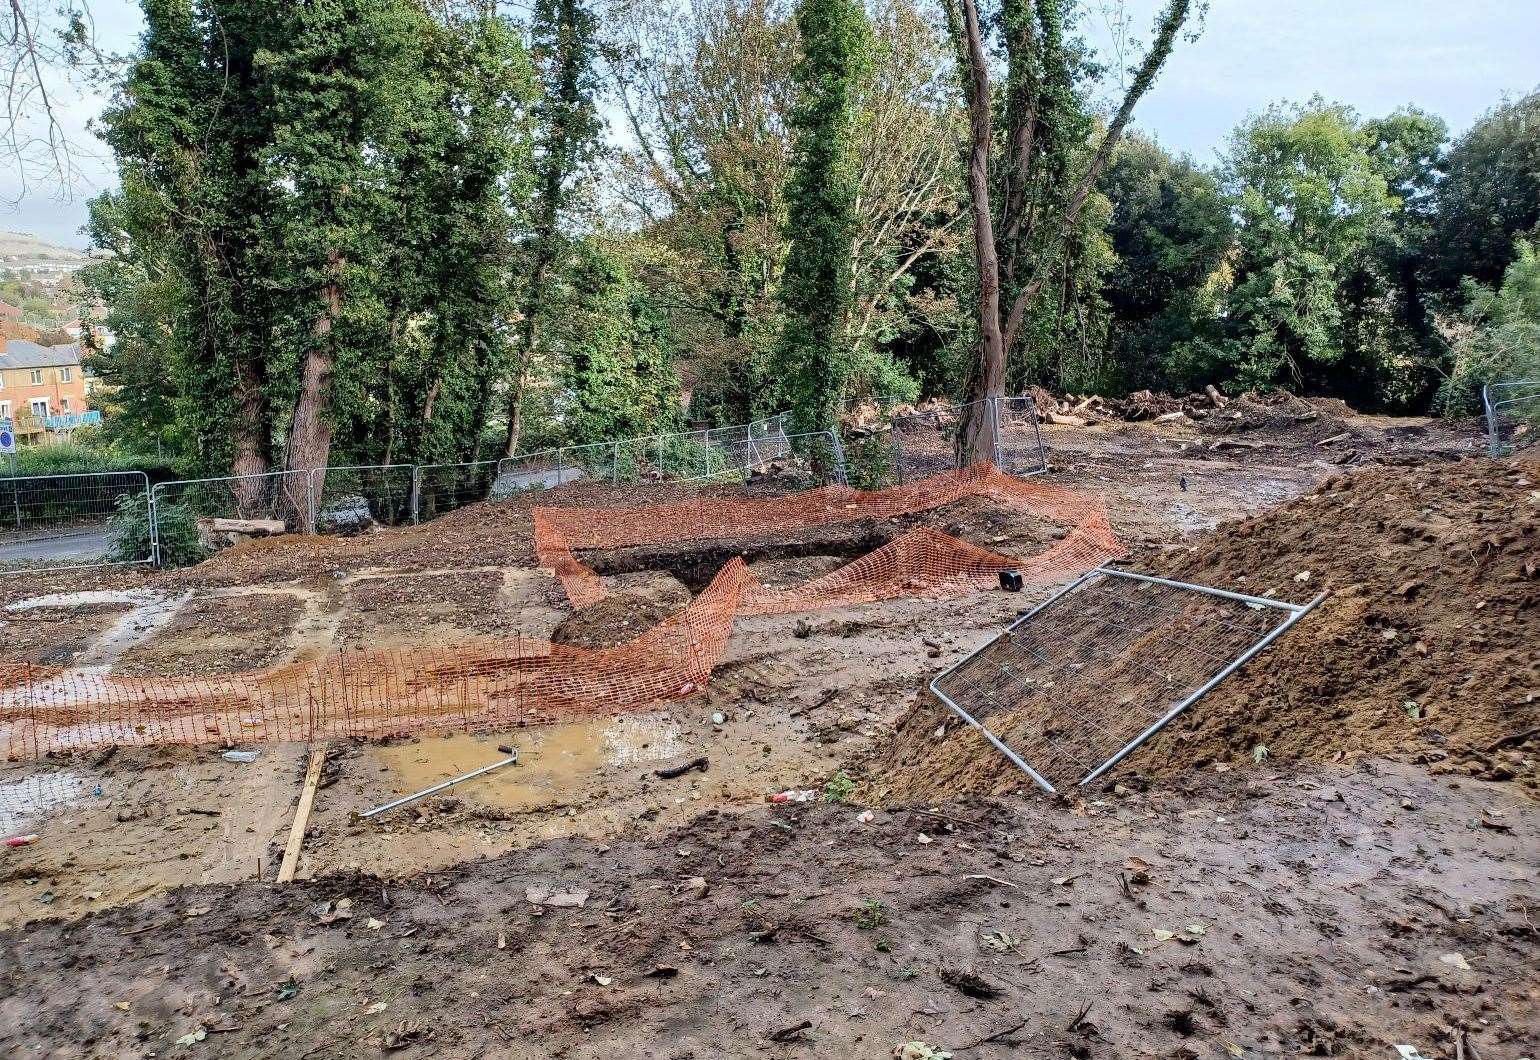 The site in Military Road, Sandgate, has been left in situ while investigations are underway